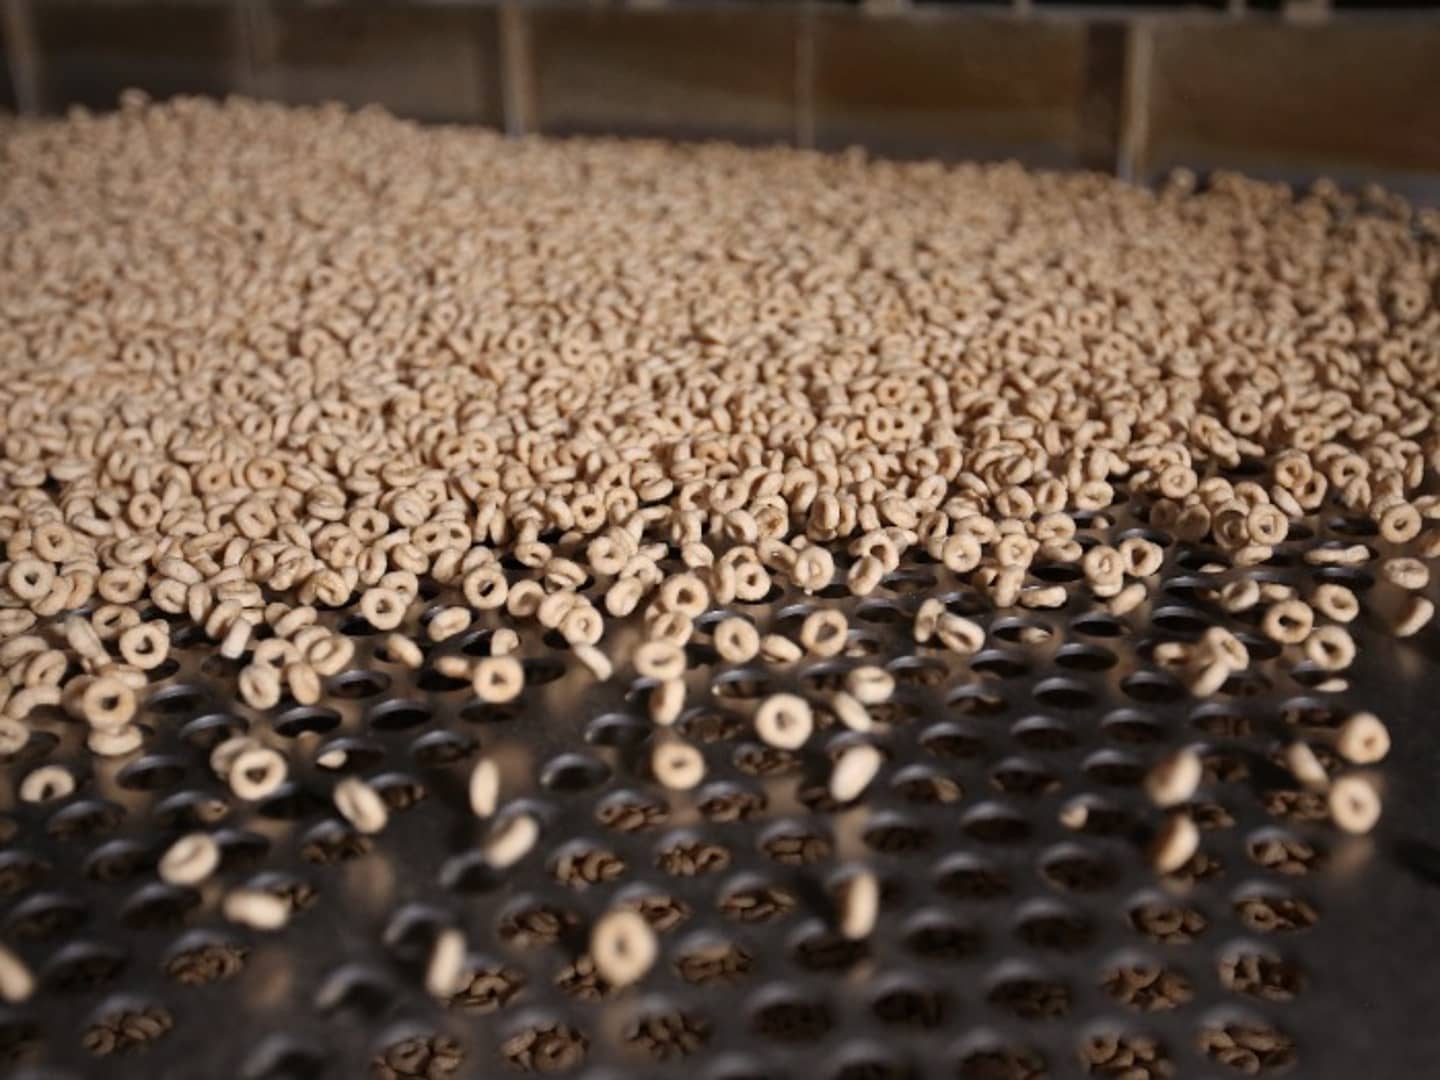 Cheerios on production line